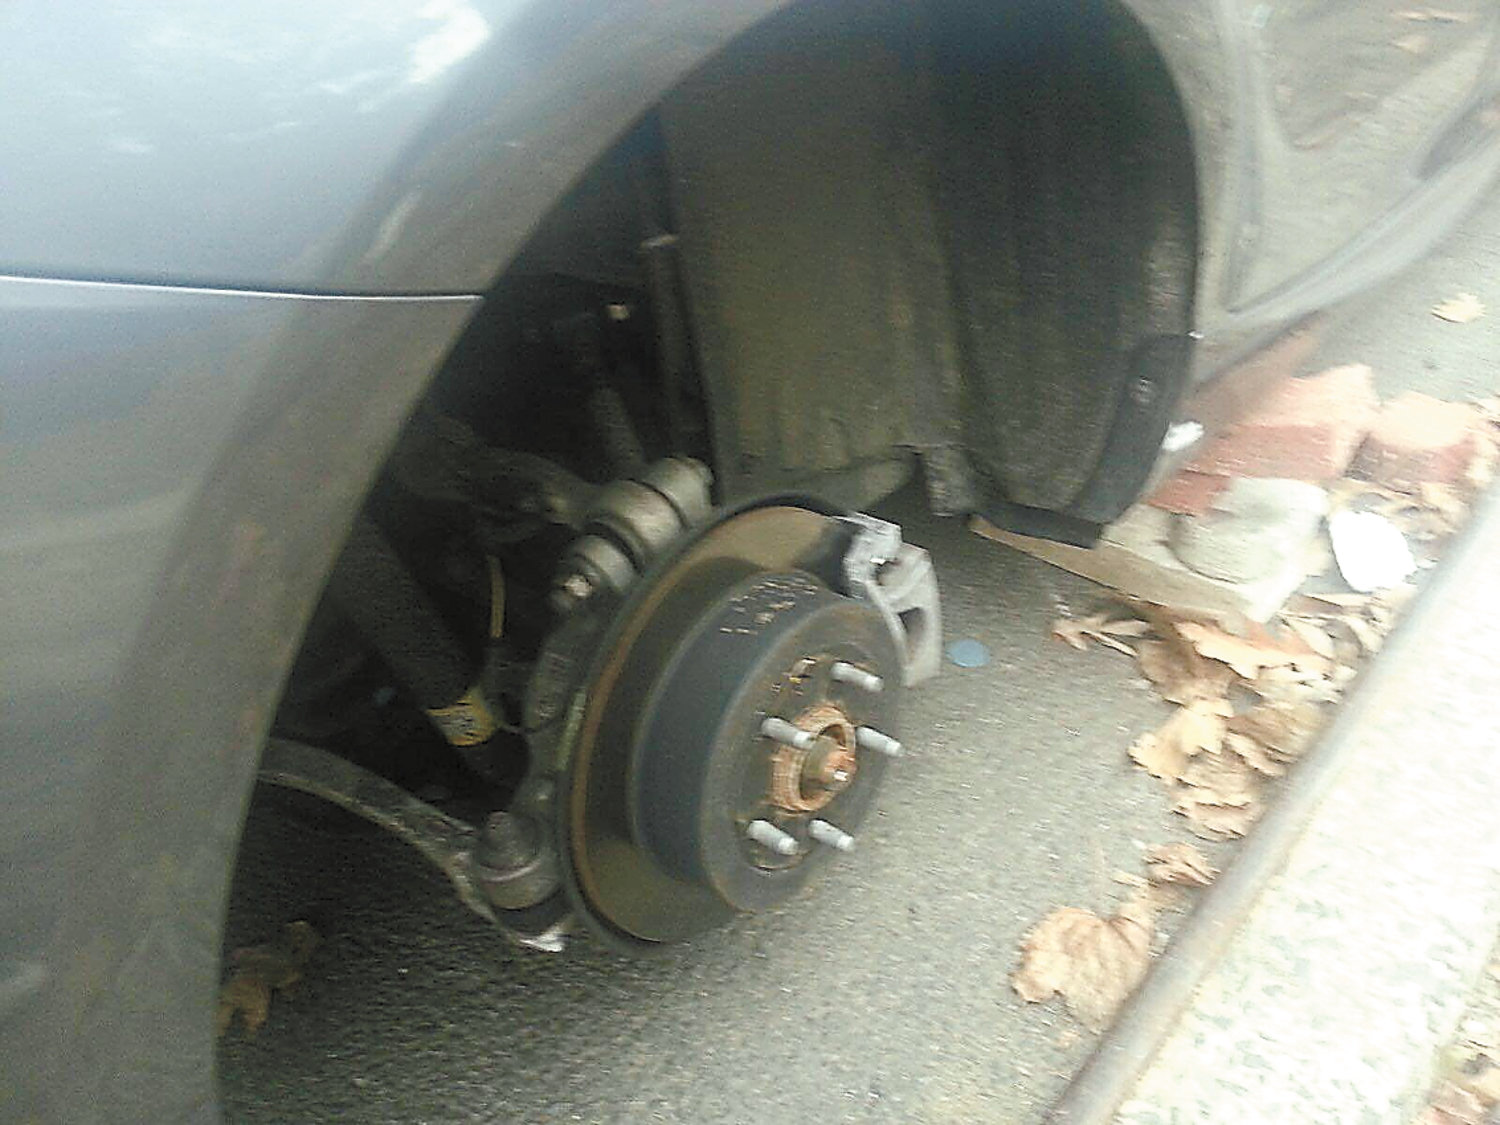 If there’s a car in the northwest Bronx, there’s a chance the tires could disappear, as seen here in 2016. Yet, it’s something that’s difficult to prevent. Potential measures against it, according to the 50th Precinct, include wheel locks and parking in a safe place, but not much more than that.